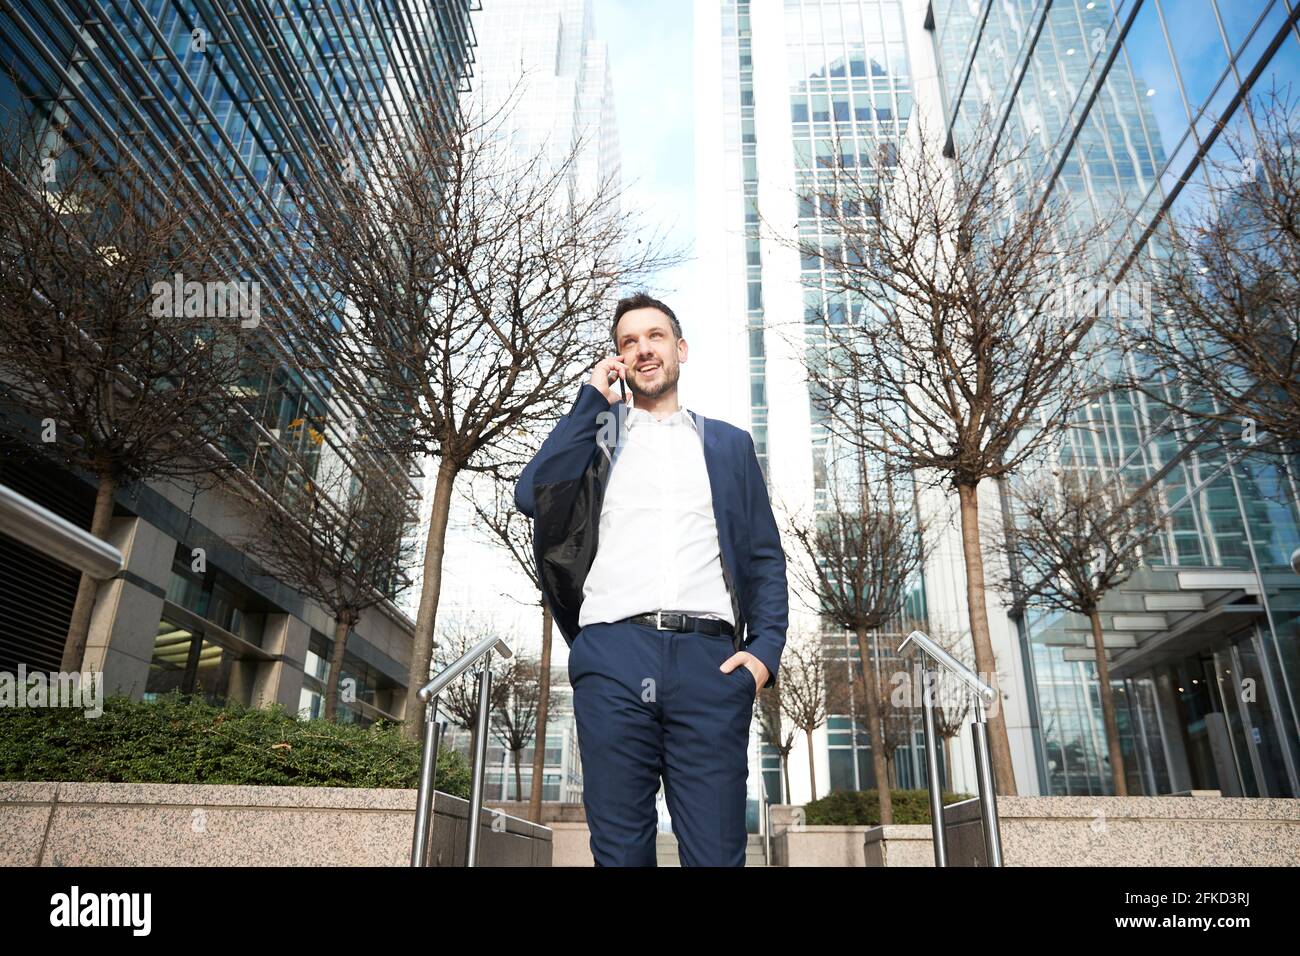 UK, London, Business man in downtown Stock Photo